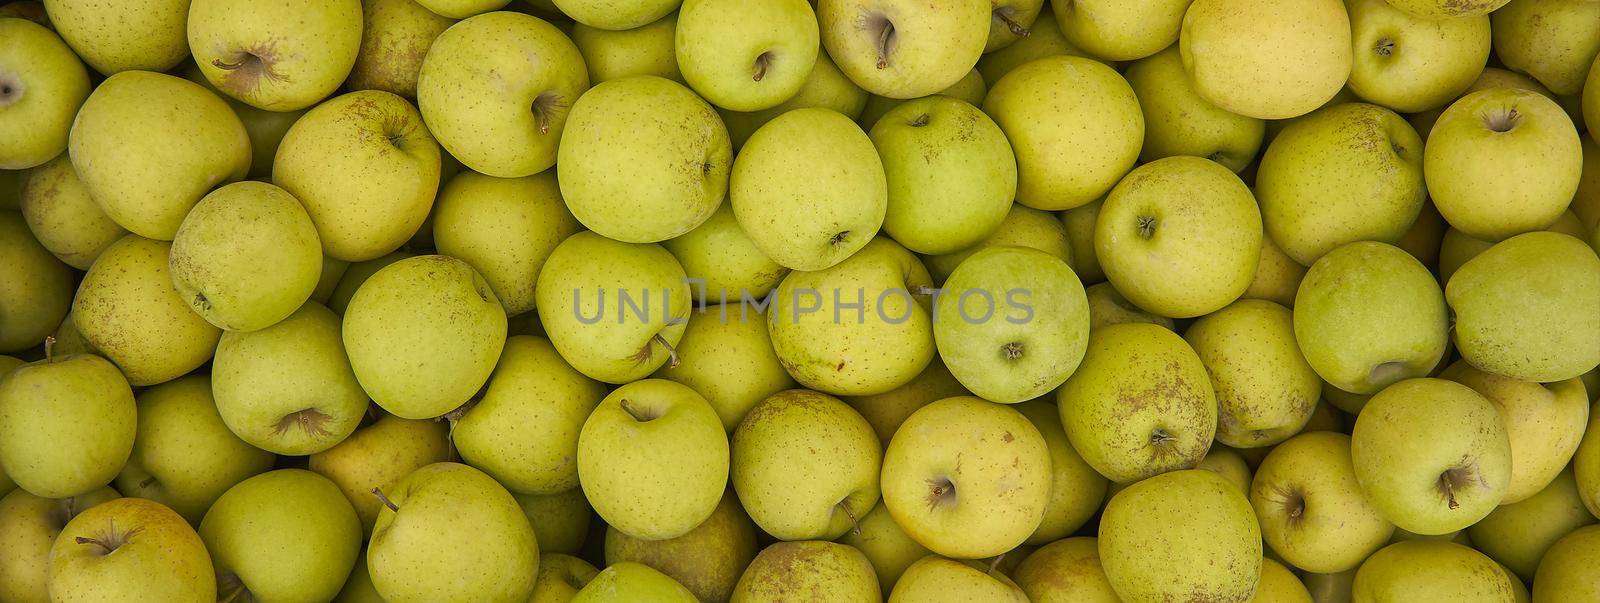 Green apple texture, banner image with copy space